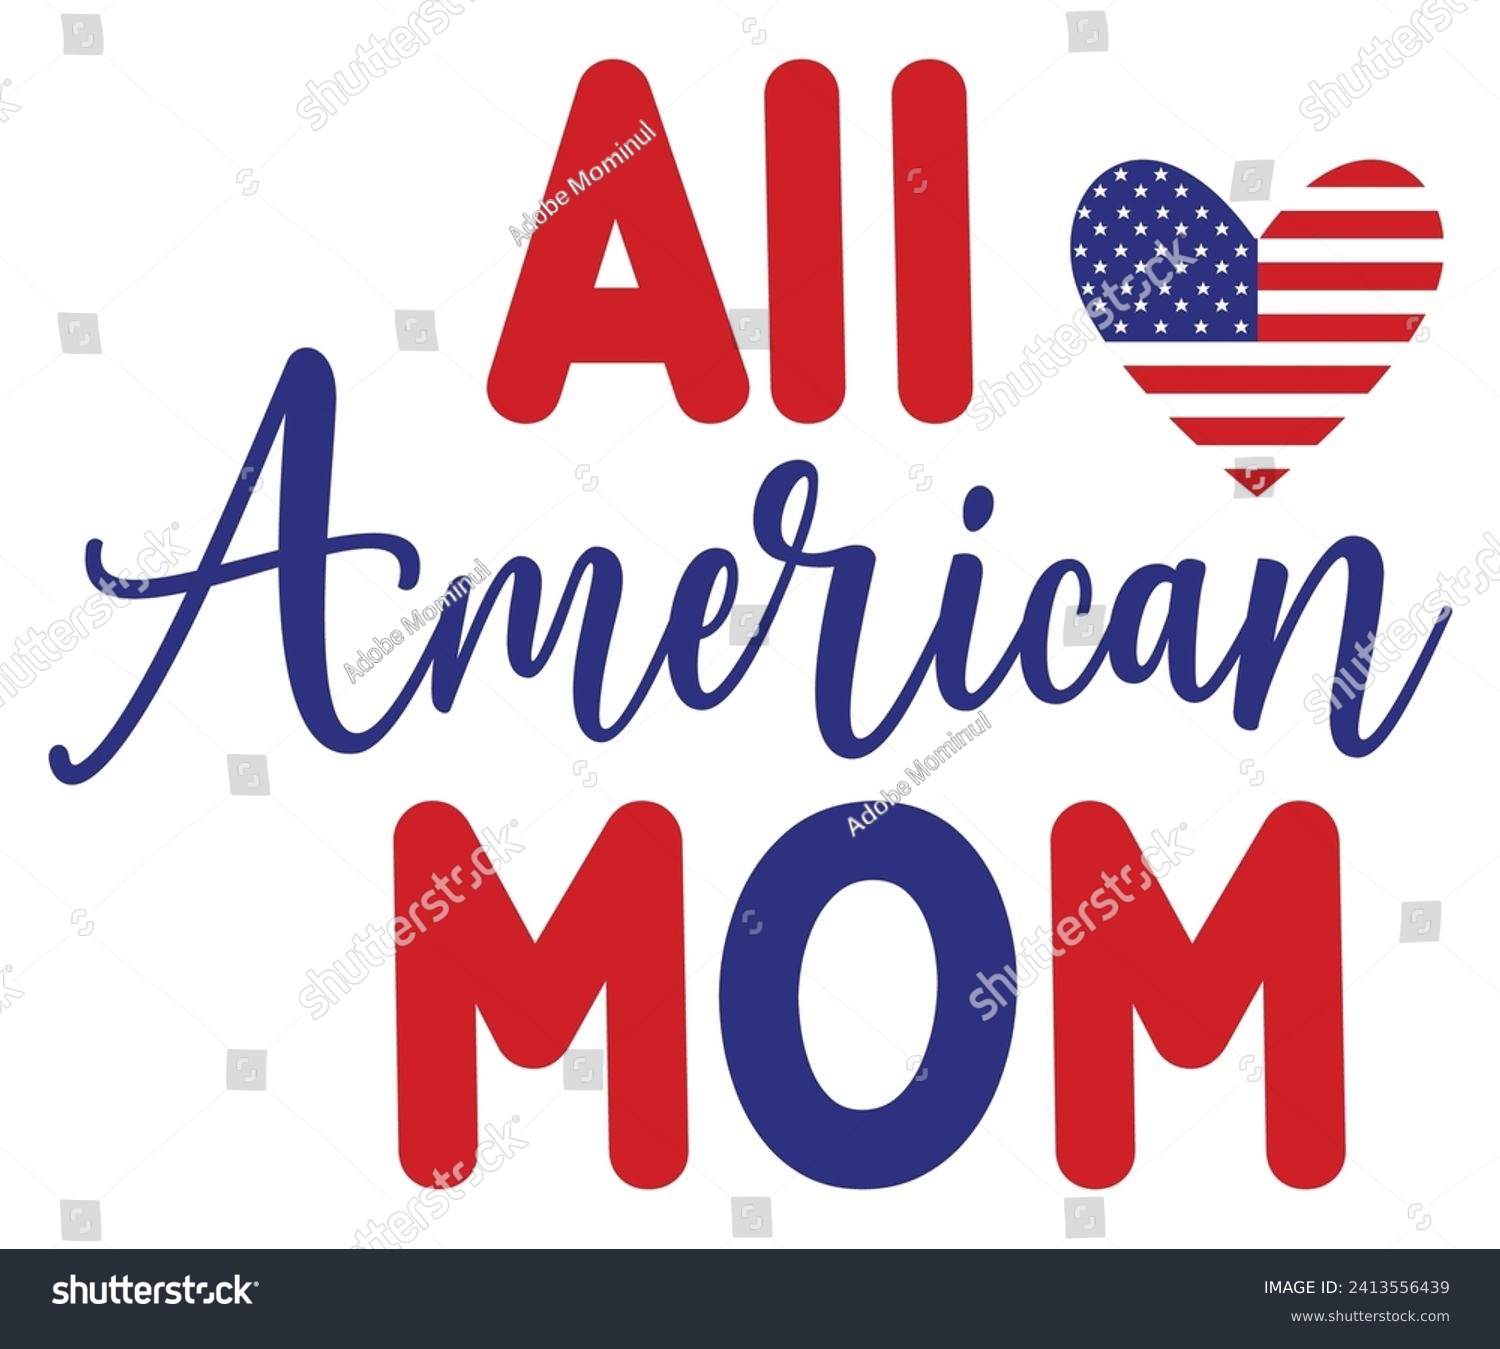 SVG of All American Mom Svg,Usa T shirt,Mothers Day Svg,Png,Mom Quotes Svg,Funny Mom Svg,Gift For Mom Svg,Mom life Svg,Mama Svg,Mommy T-shirt Design,Svg Cut File,Dog Mom deisn,Retro Groovy,Auntie, svg